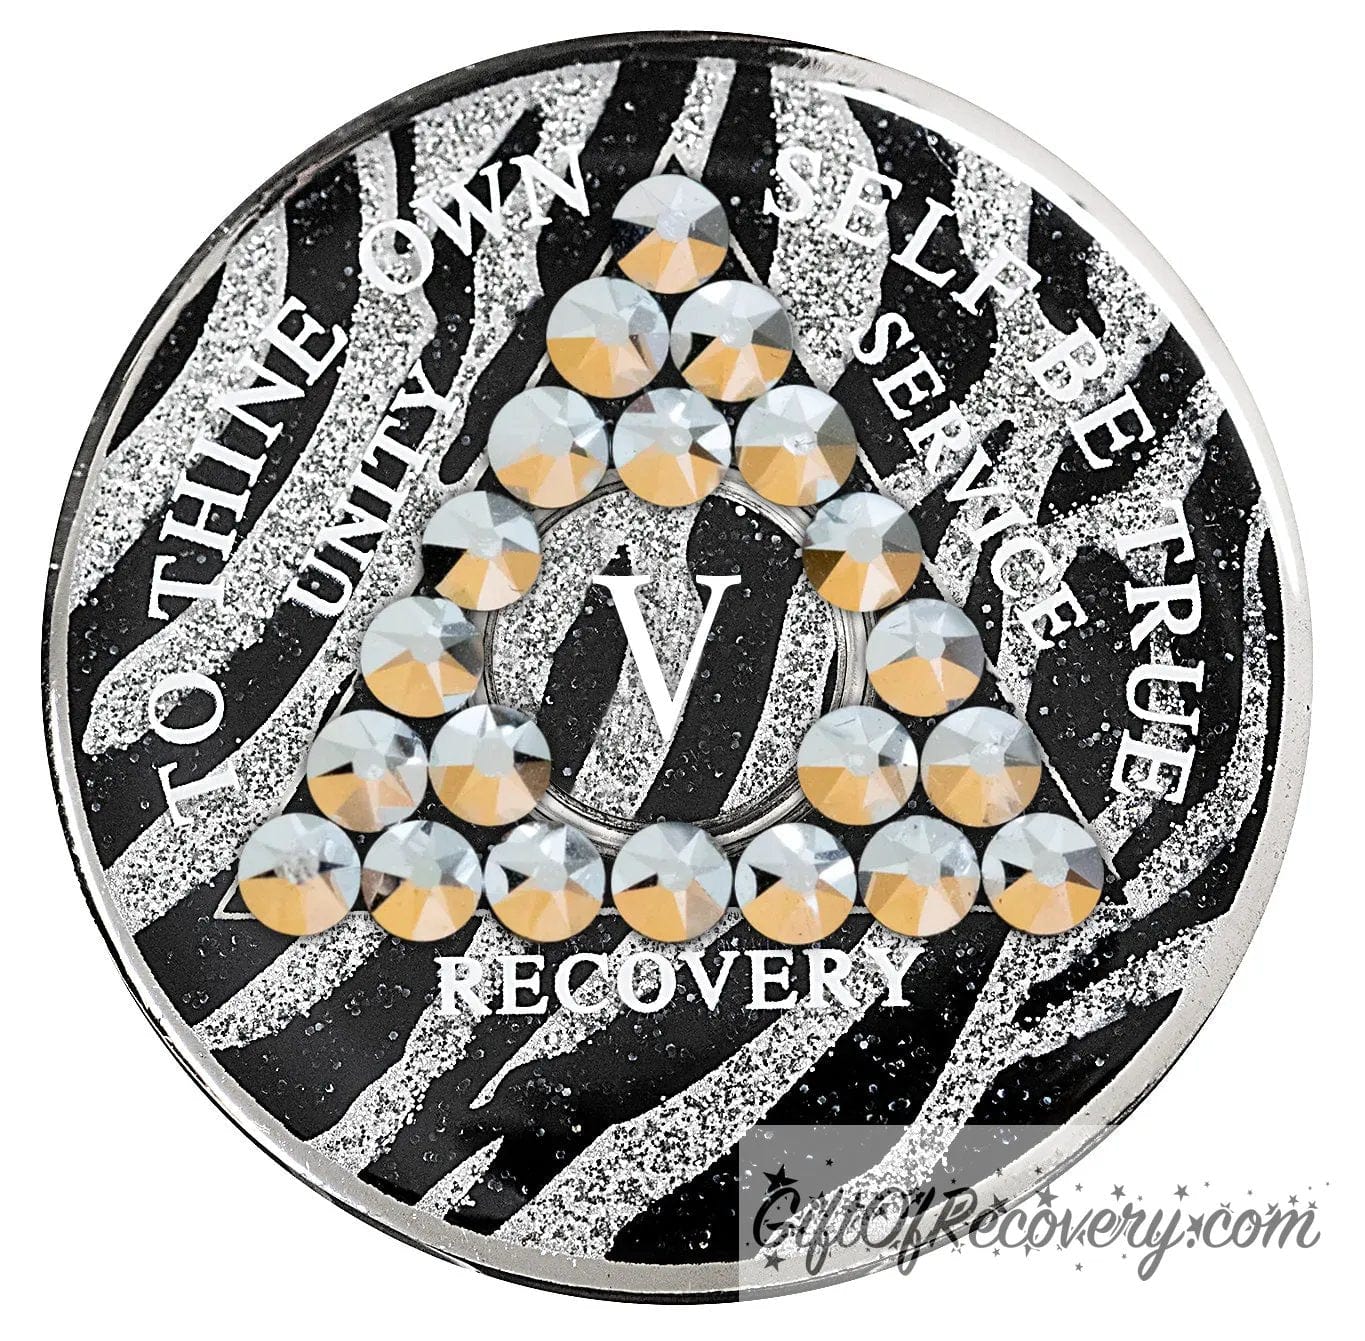 5 Year zebra glitter print, black and silver, AA medallion with 21 genuine comet crystals in a triangle around the year, the lettering unity, service, recovery, the 1 year and To Thine Own Self Be True are in white and the recovery medallion rim is silver.